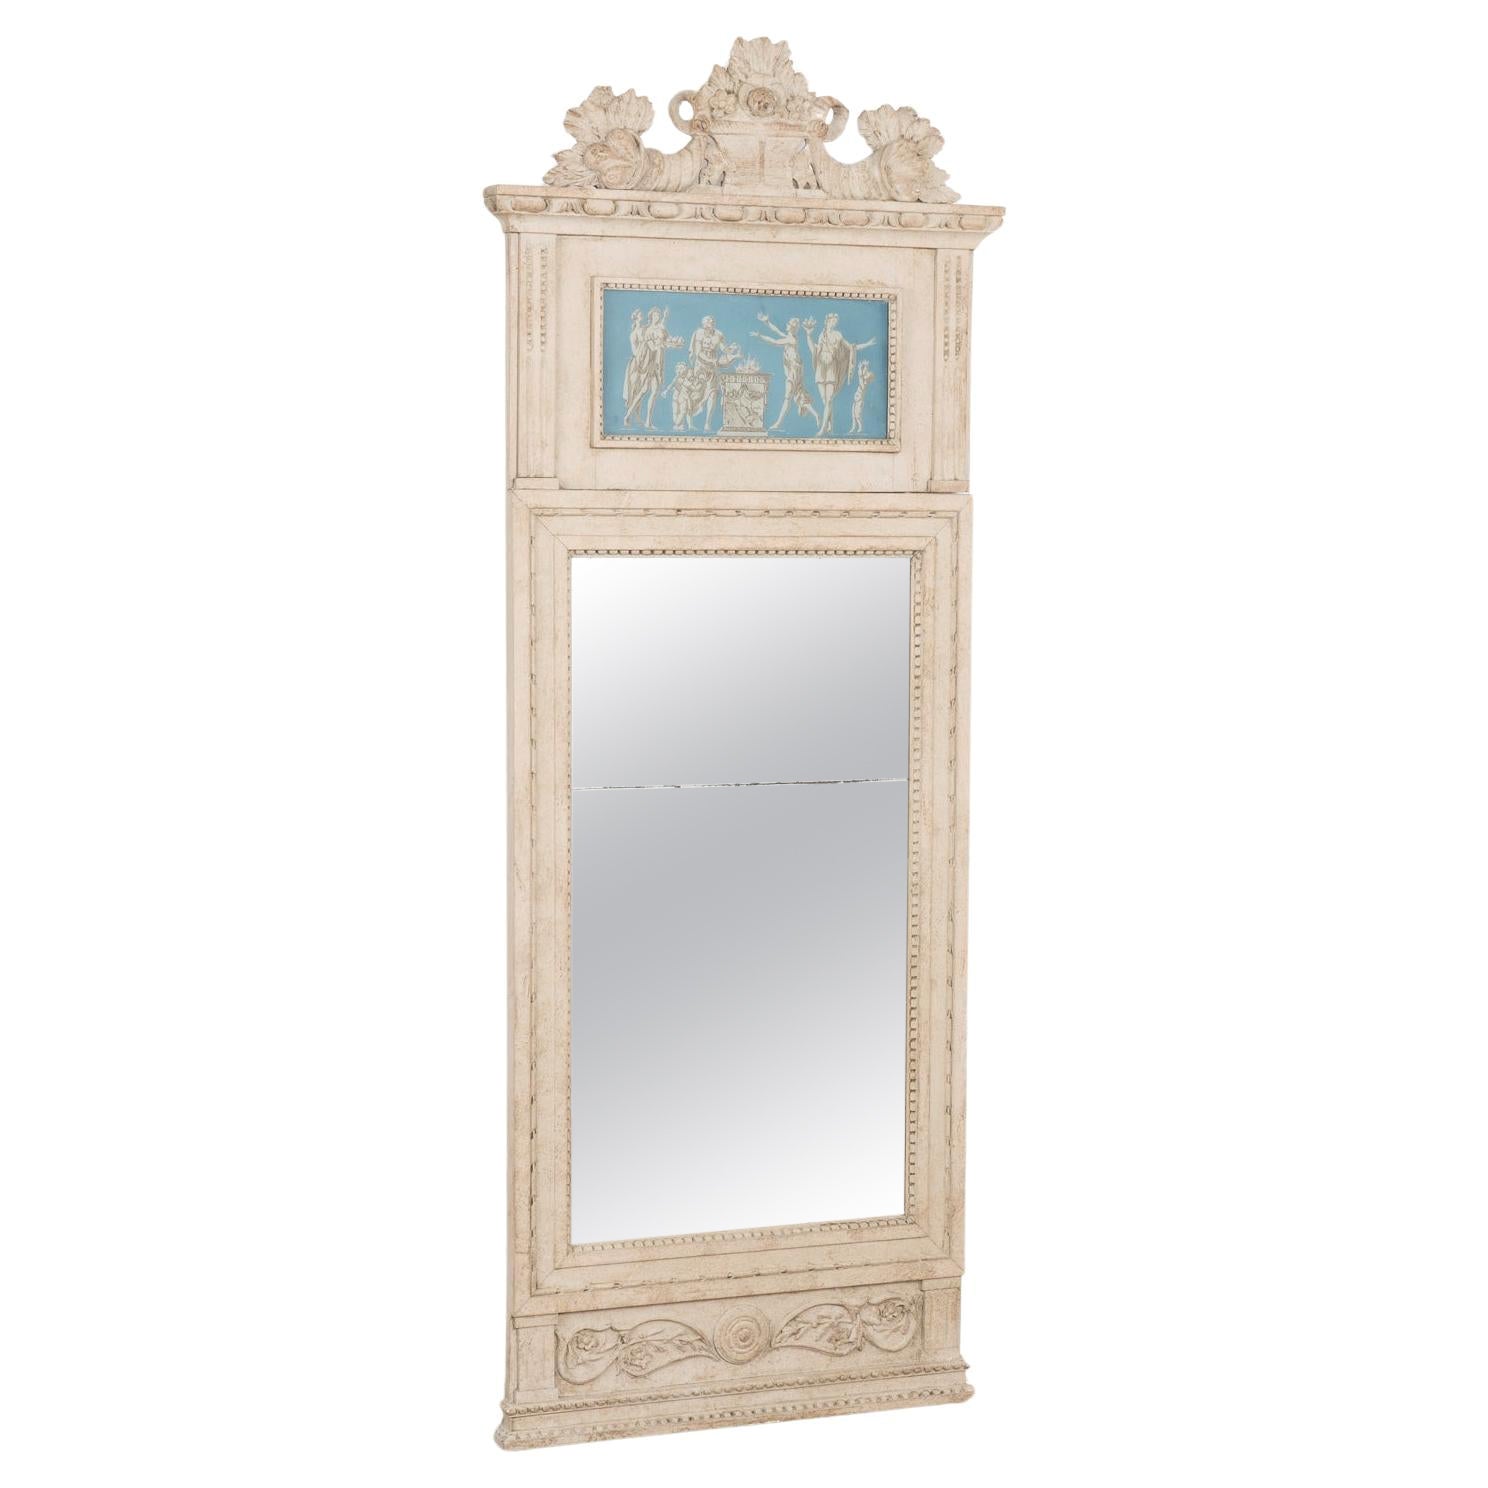 Tall White Painted Trumeau Mirror with Greek Figures, Sweden circa 1900 For Sale